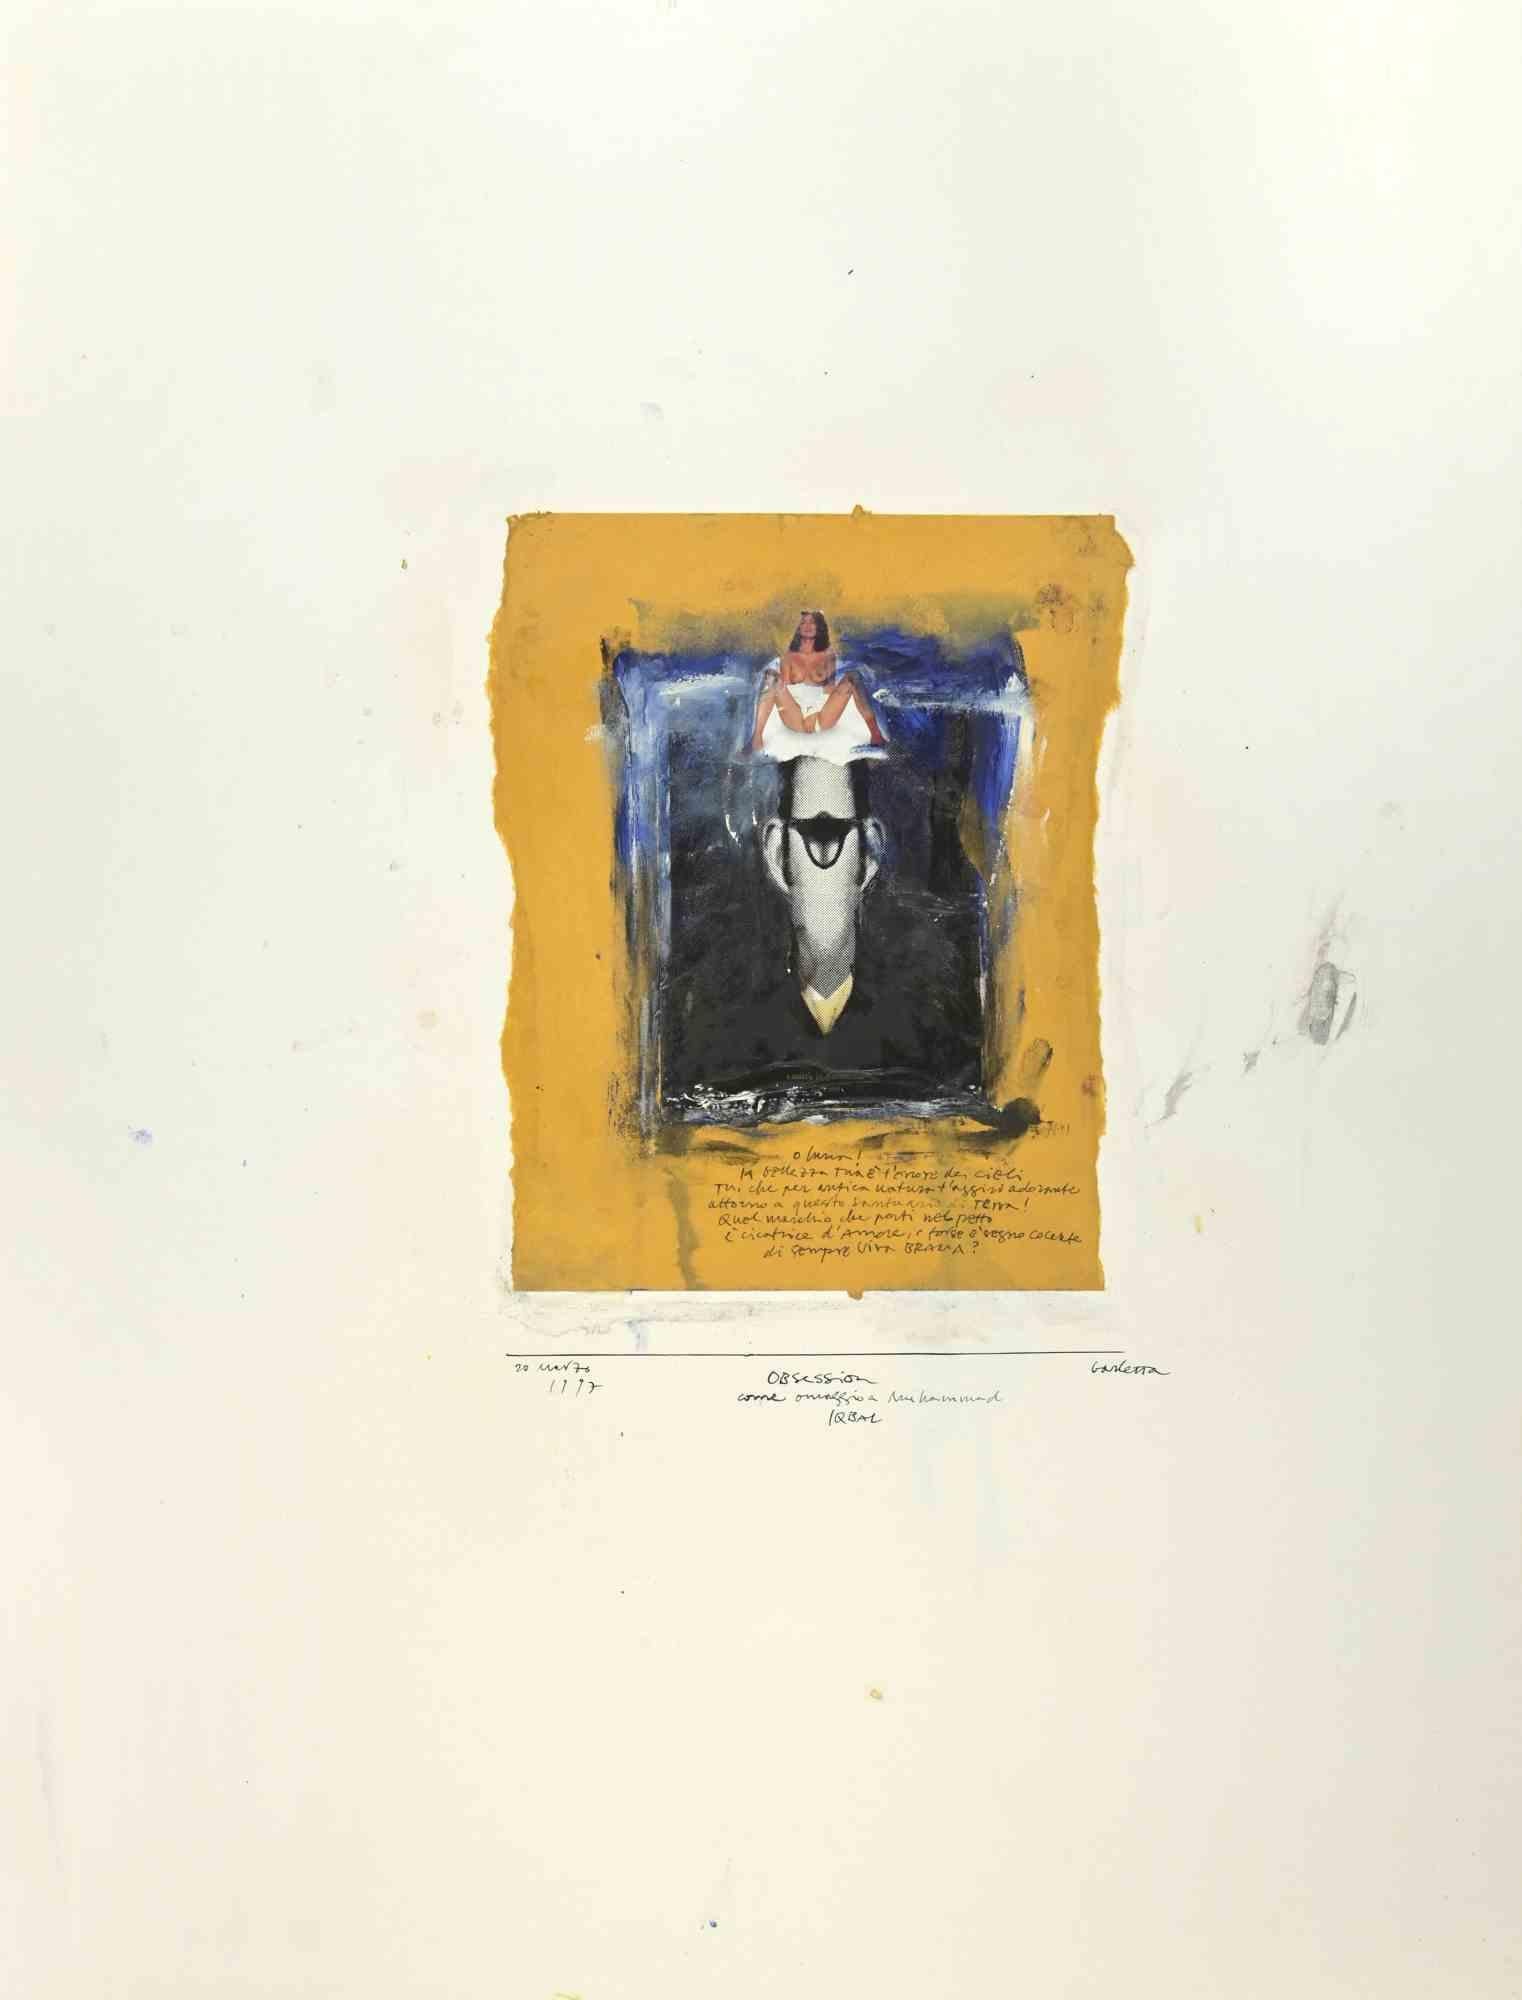 Obsession is a  painting artwork, realized by Sergio Barletta in 1997.

Tempera, Collage, and Watercolor on Cardboard

Hand-signed, titled, and dated on the lower margin. 

Good conditions with some foxing.

Sergio Barletta (1934) is an Italian